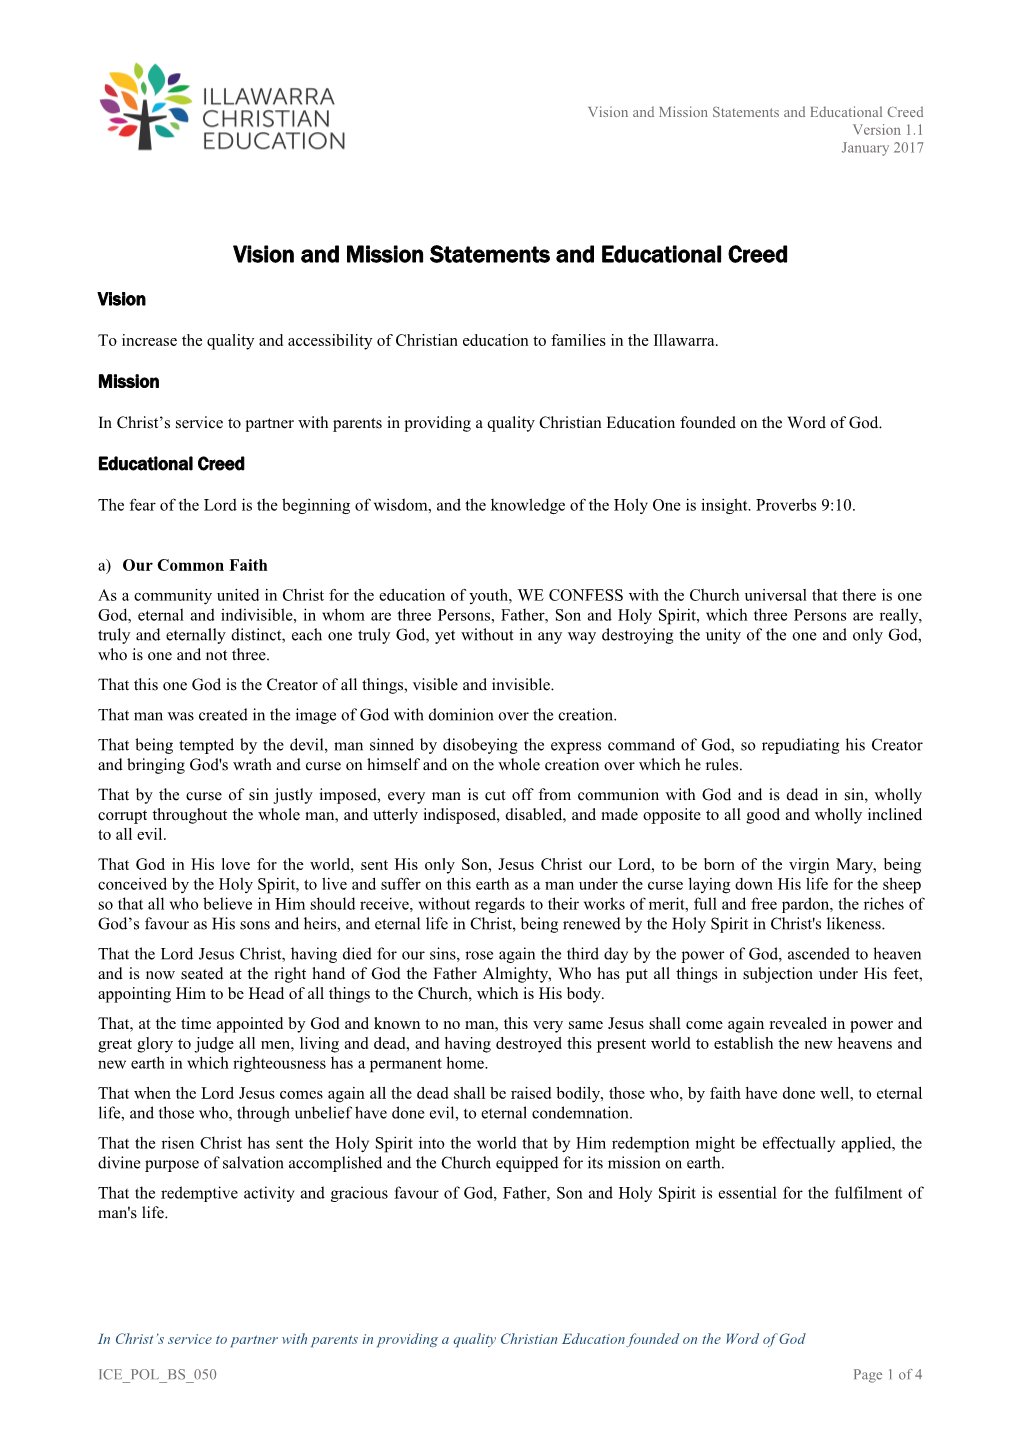 Vision and Mission Statements and Educational Creed